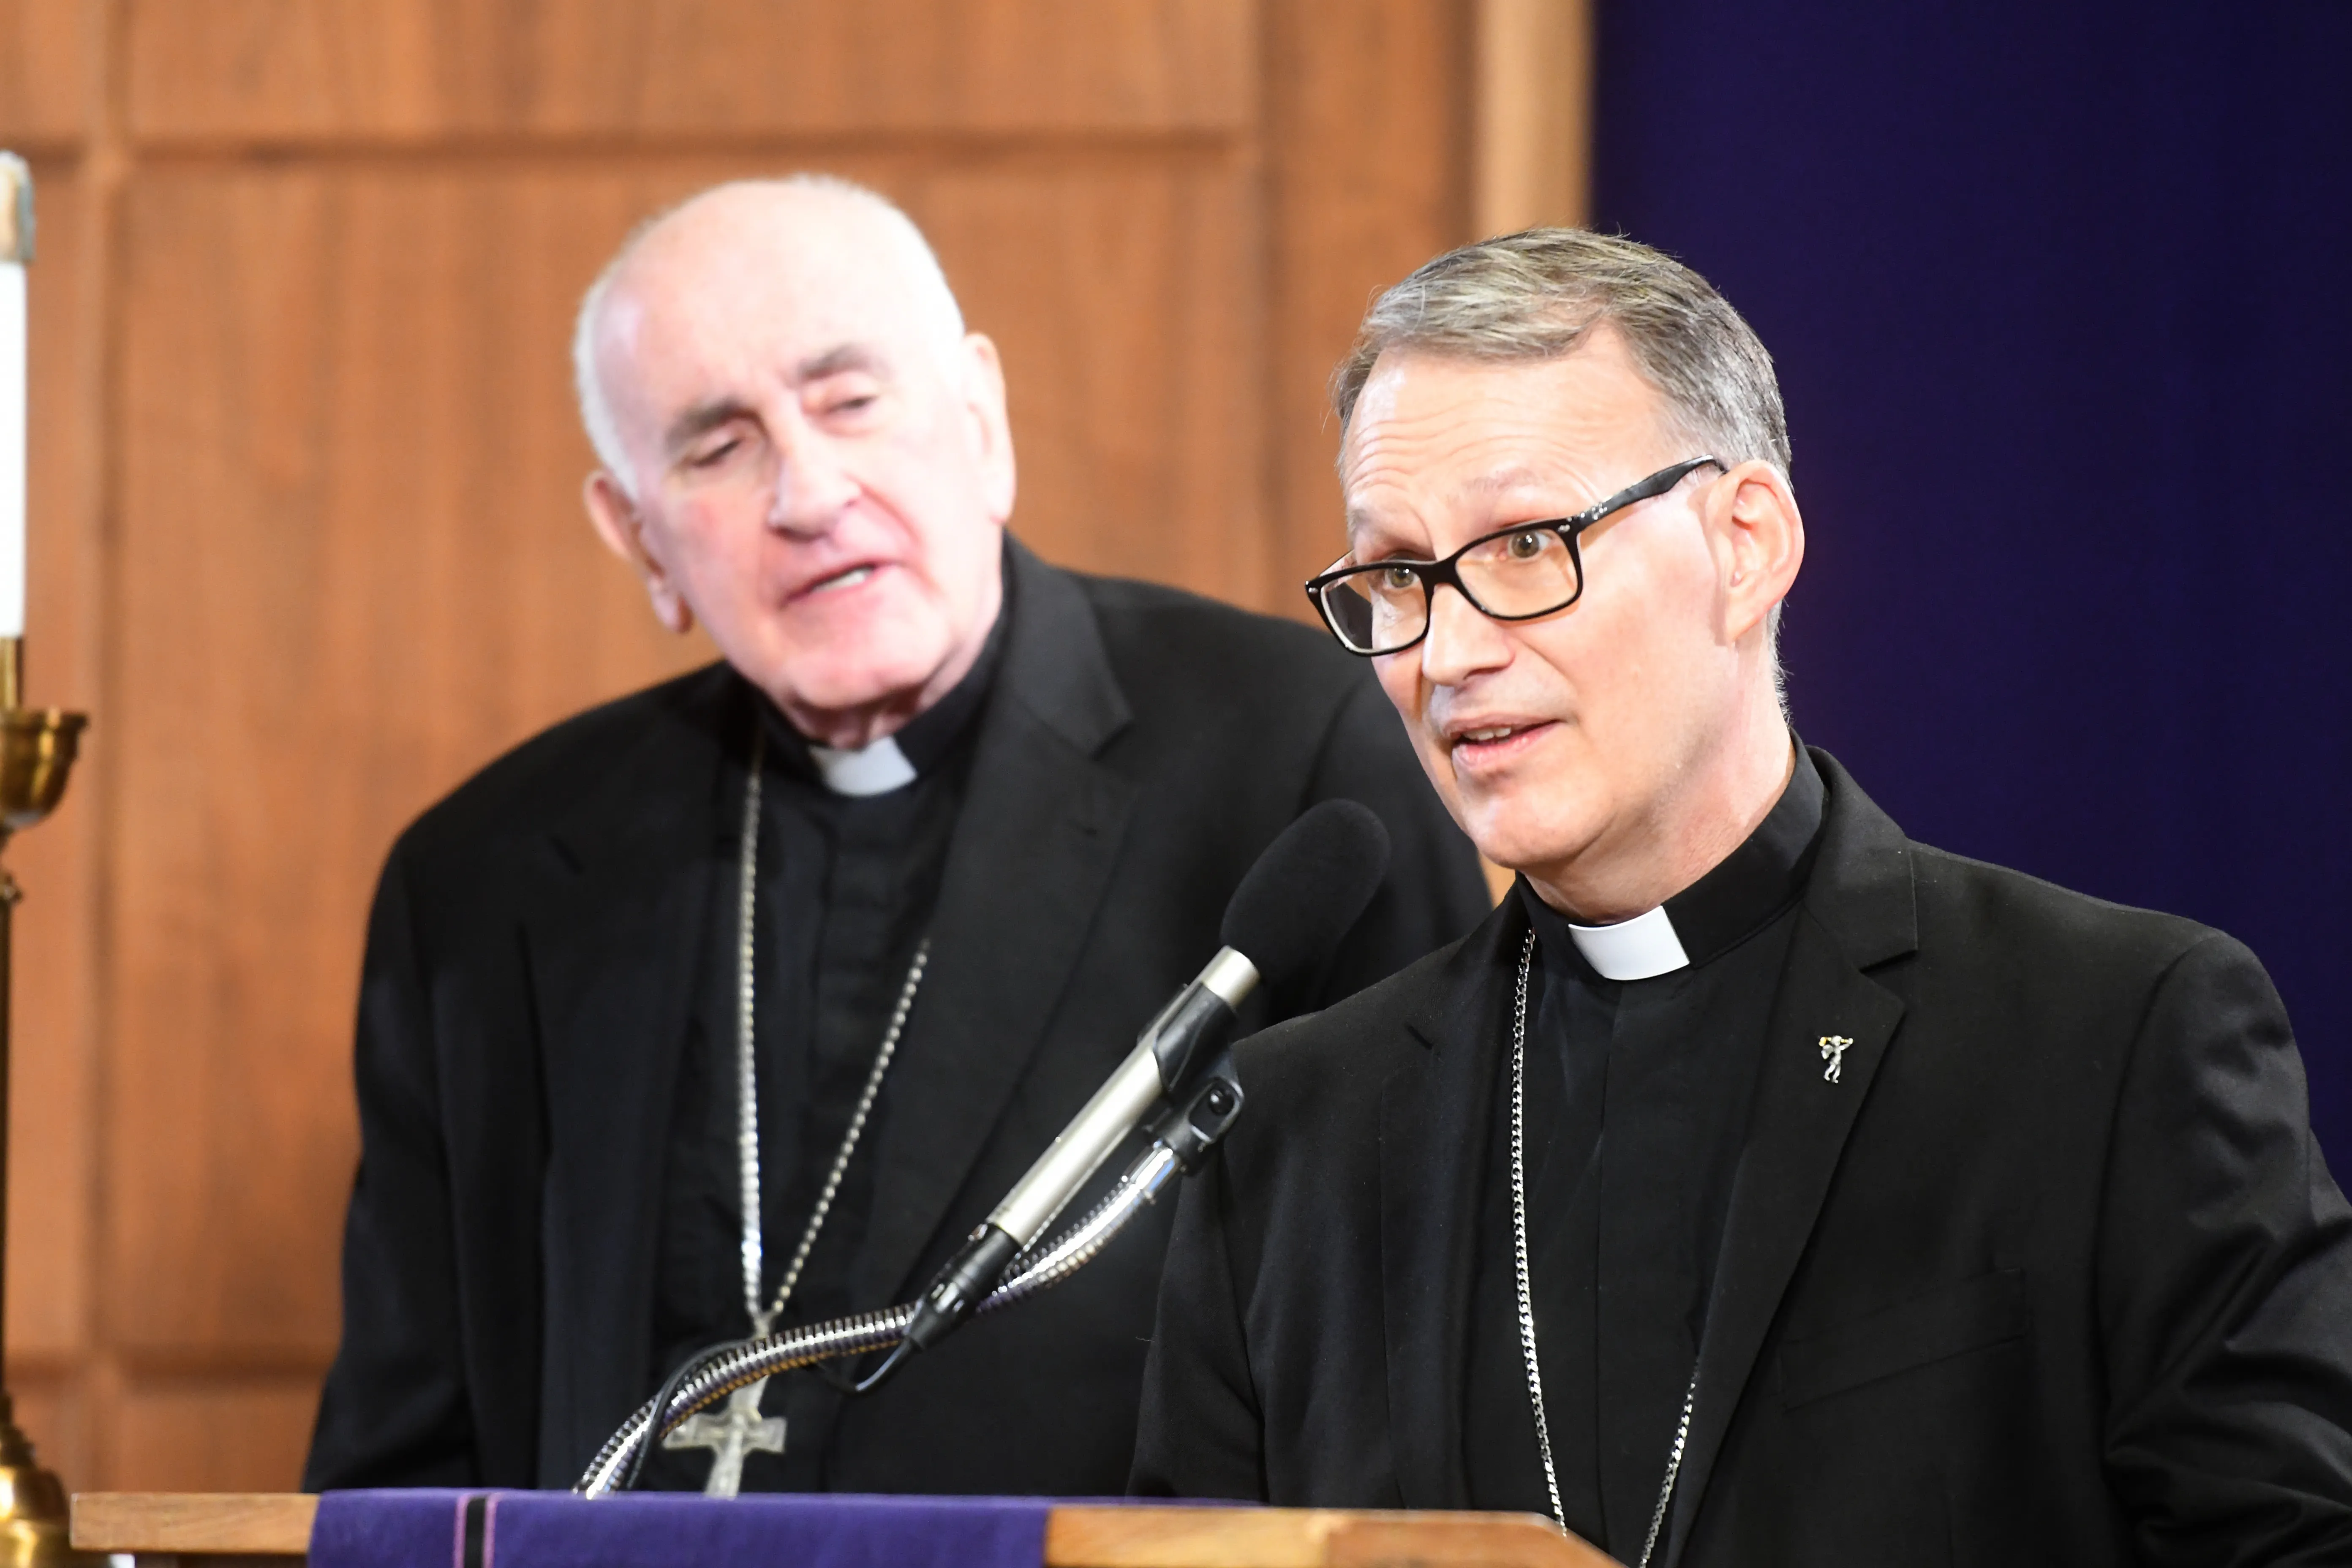 Father Patrick Neary at the press conference following the announcement that Pope Francis named him to succeed Bishop Donald Kettler as shepherd of the Diocese of St. Cloud?w=200&h=150